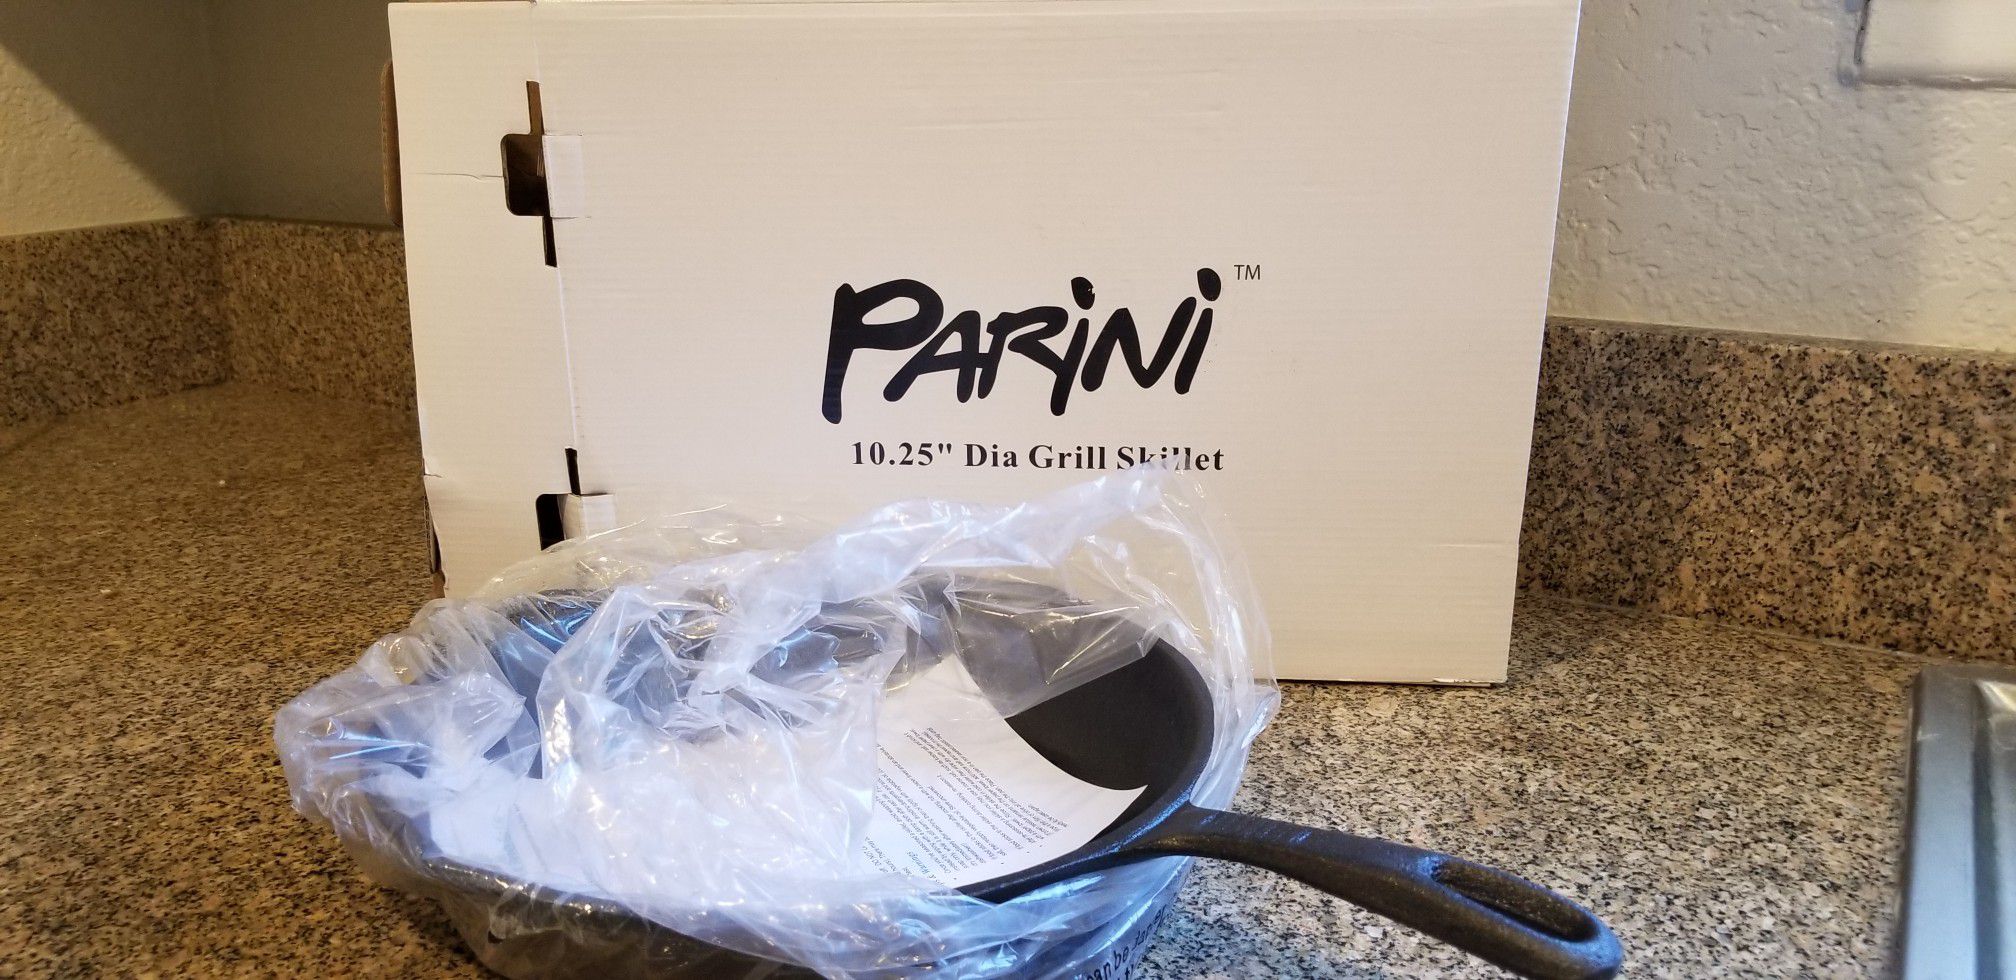 Two Parini Cast Iron, Grill and Pan